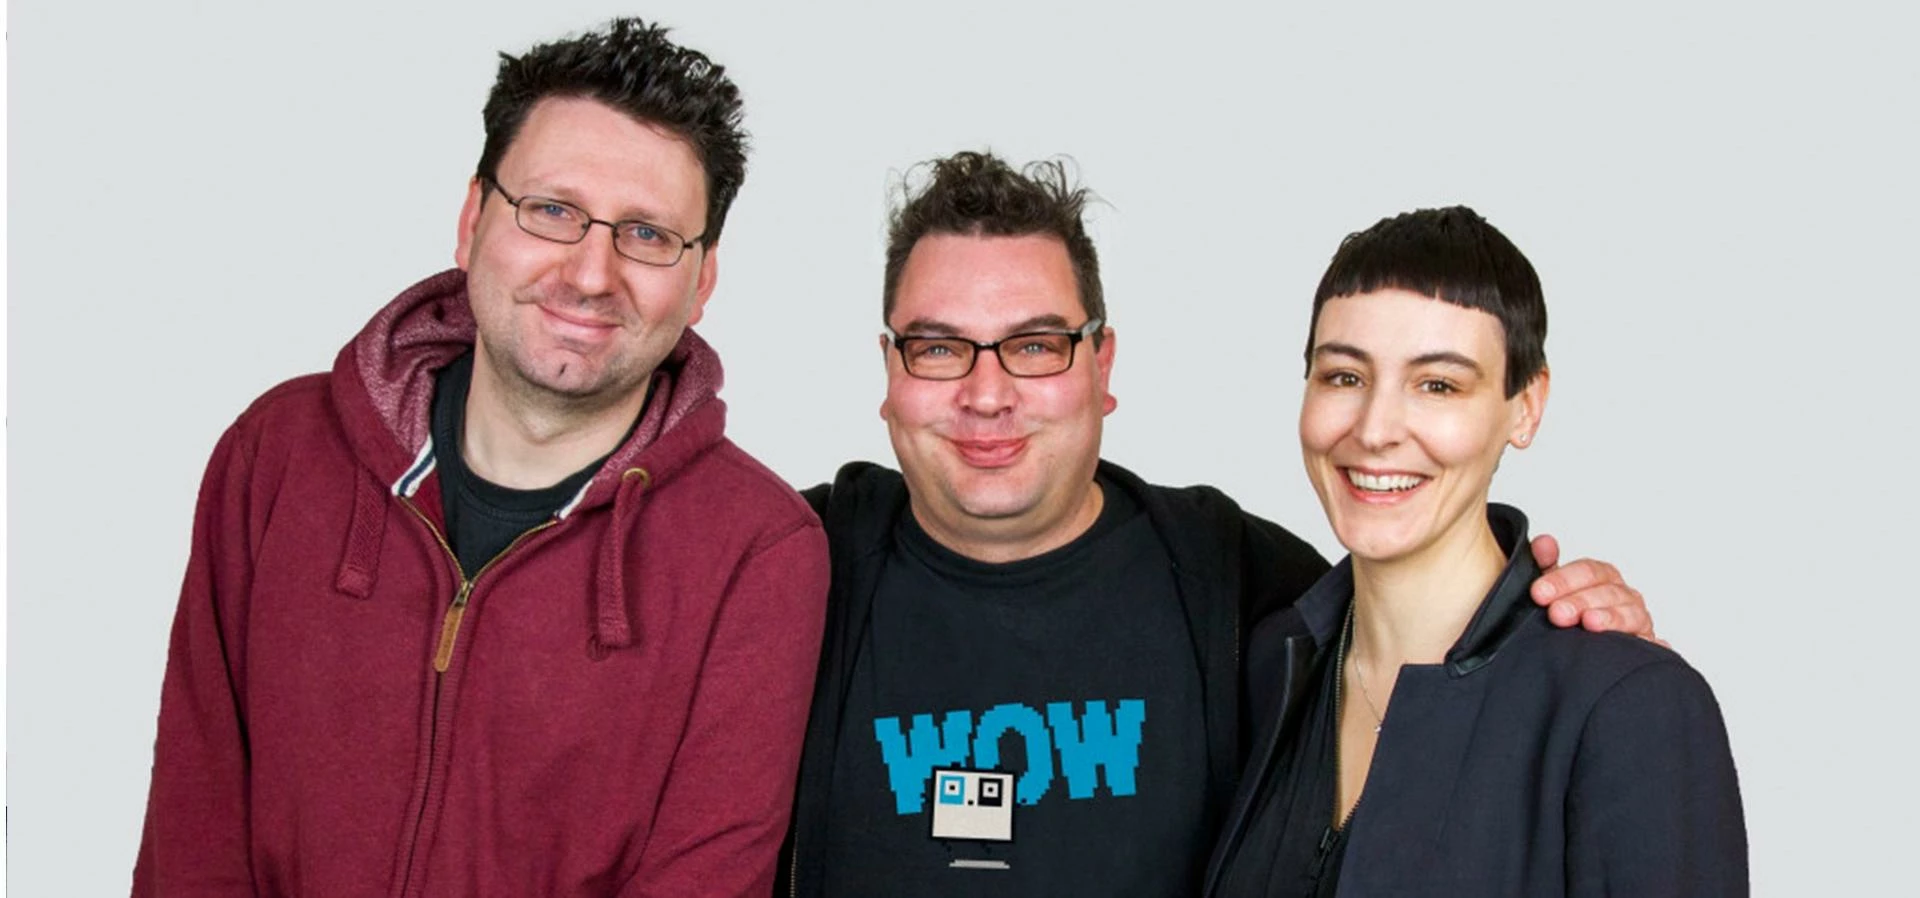 Matt Cooke, Scott Button and Sarah Wood, co-founders of Unruly. Photo: Unruly